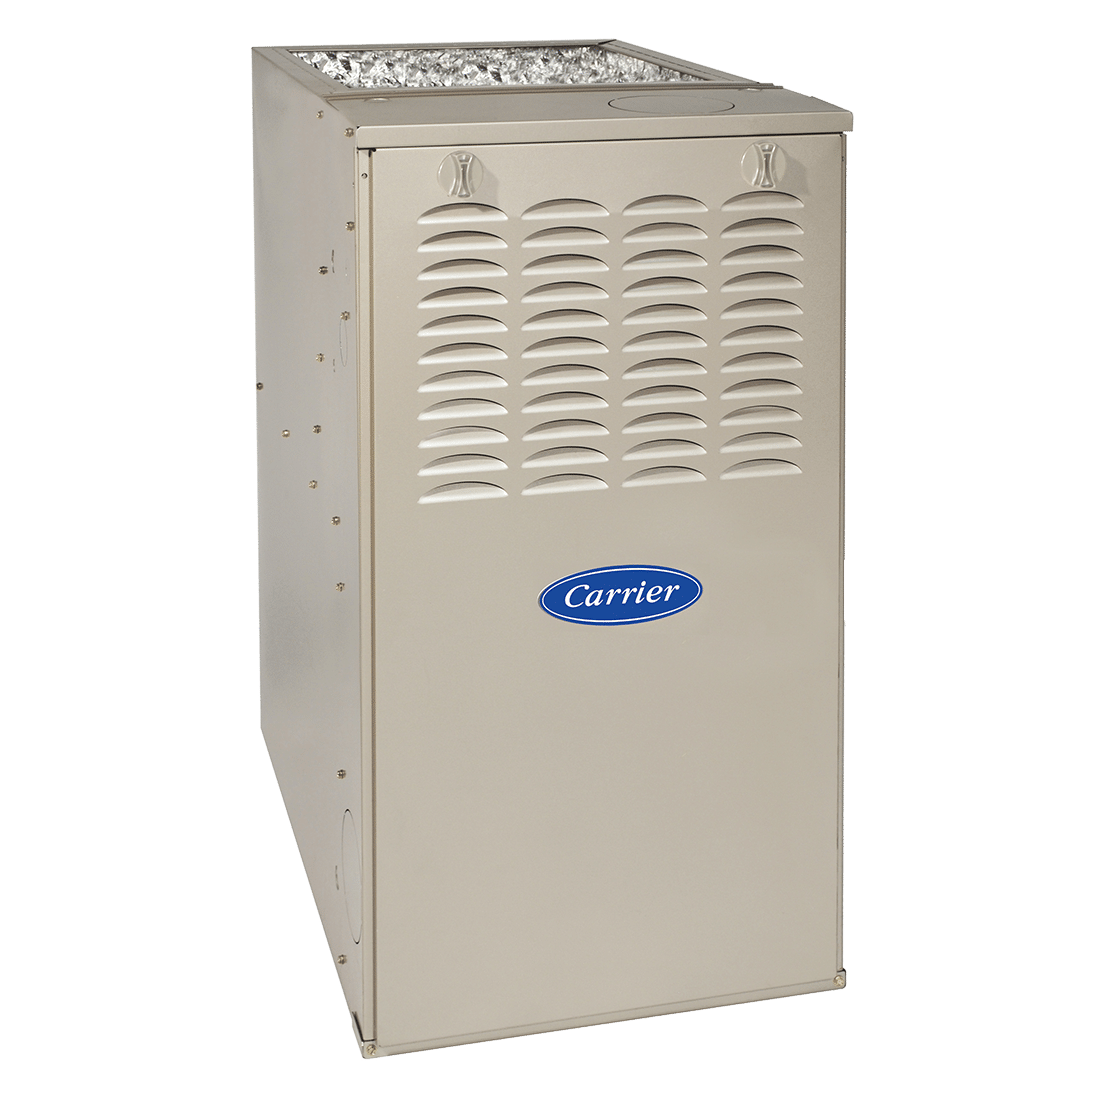 Reliable Furnaces for Warmth and Comfort | Air 1 Mechanical